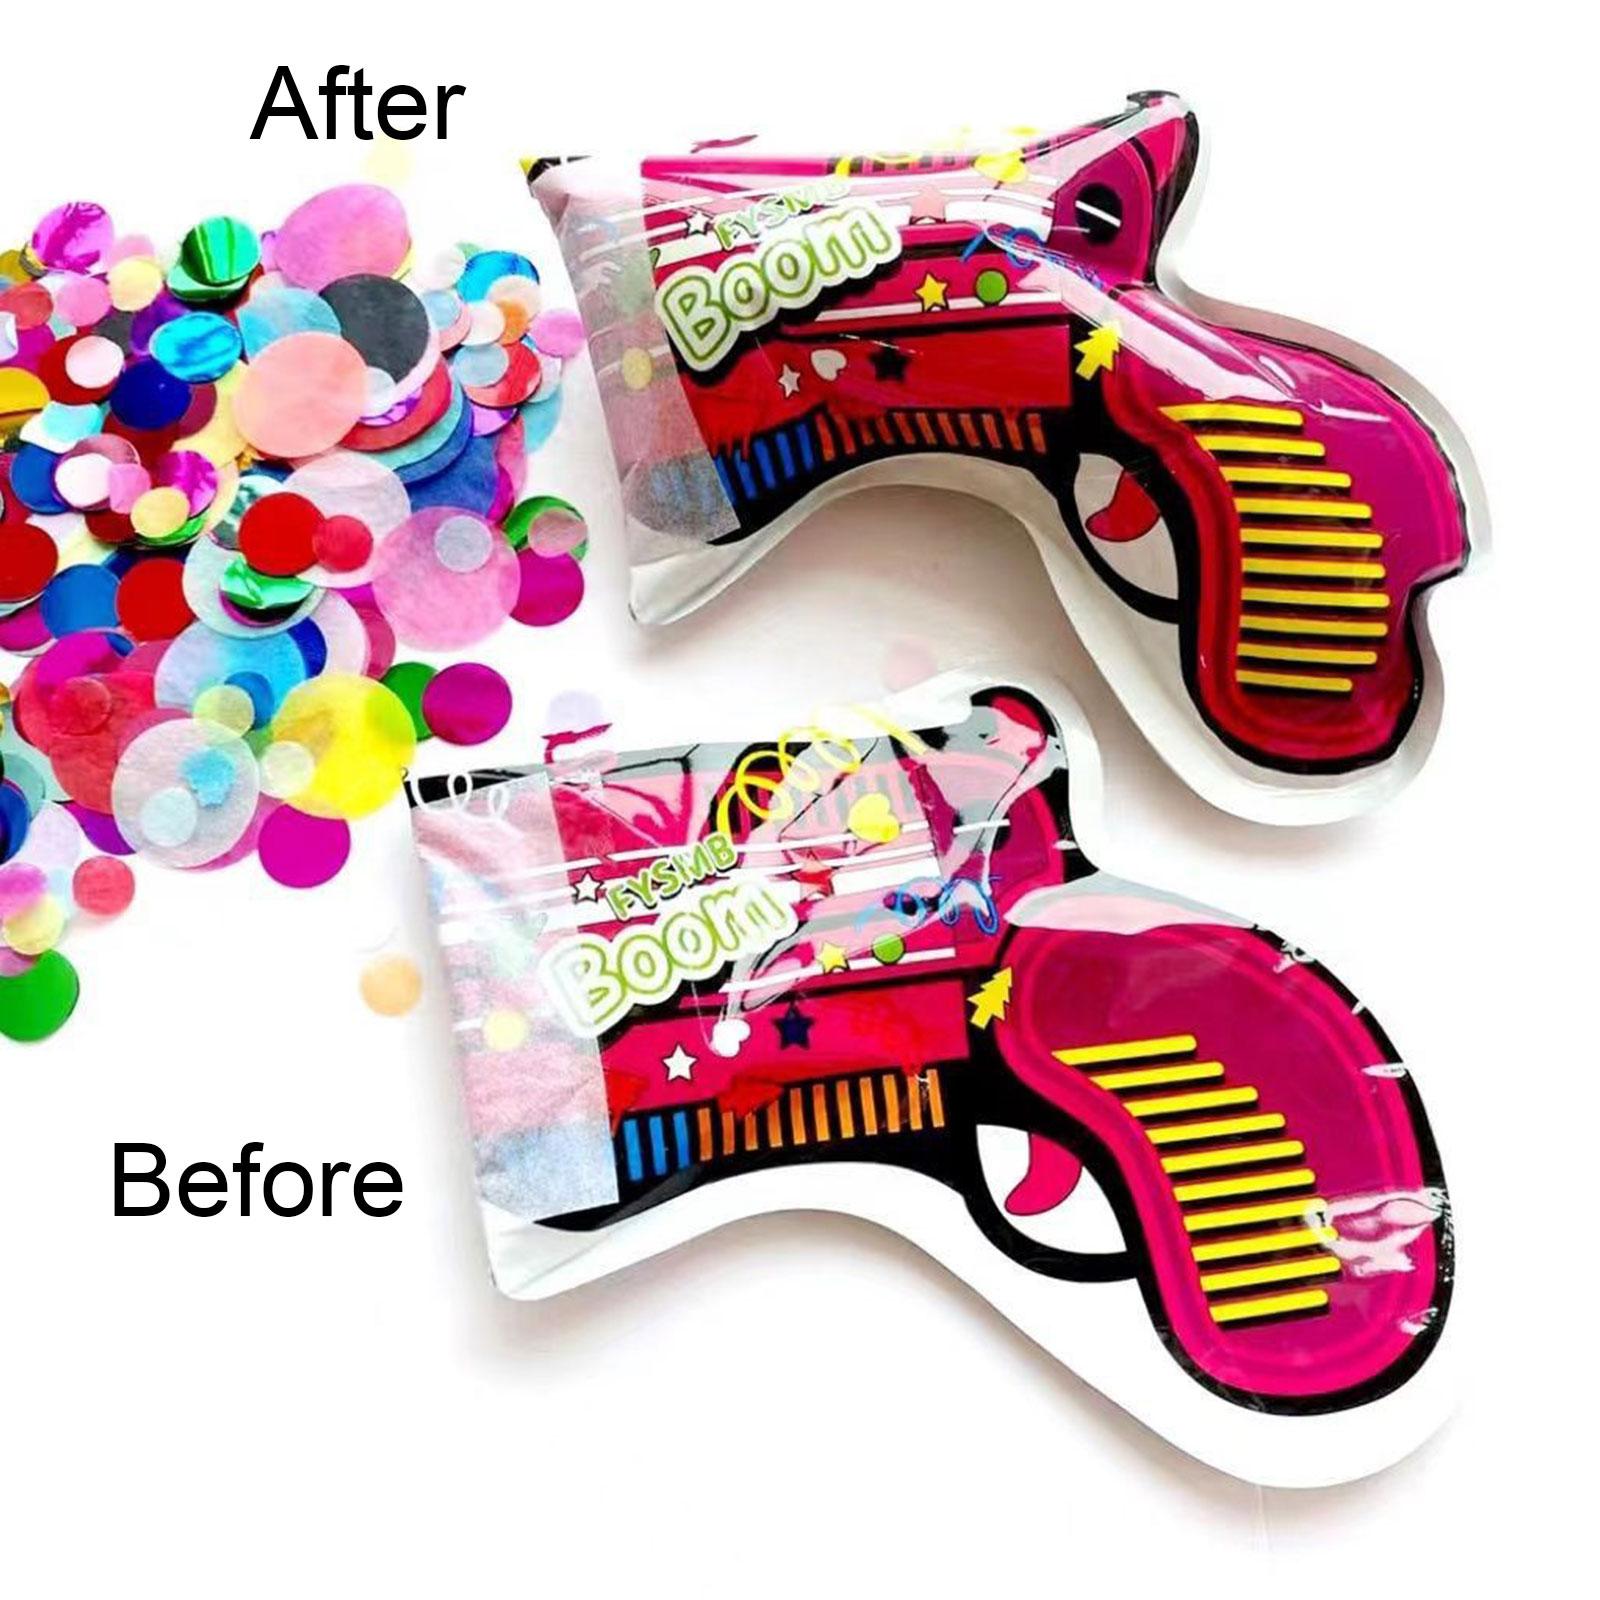 Confetti Cannon🎉Self-inflating toys - inflatable fireworks gun🎉 - 🔥Average 0.49$ each🔥